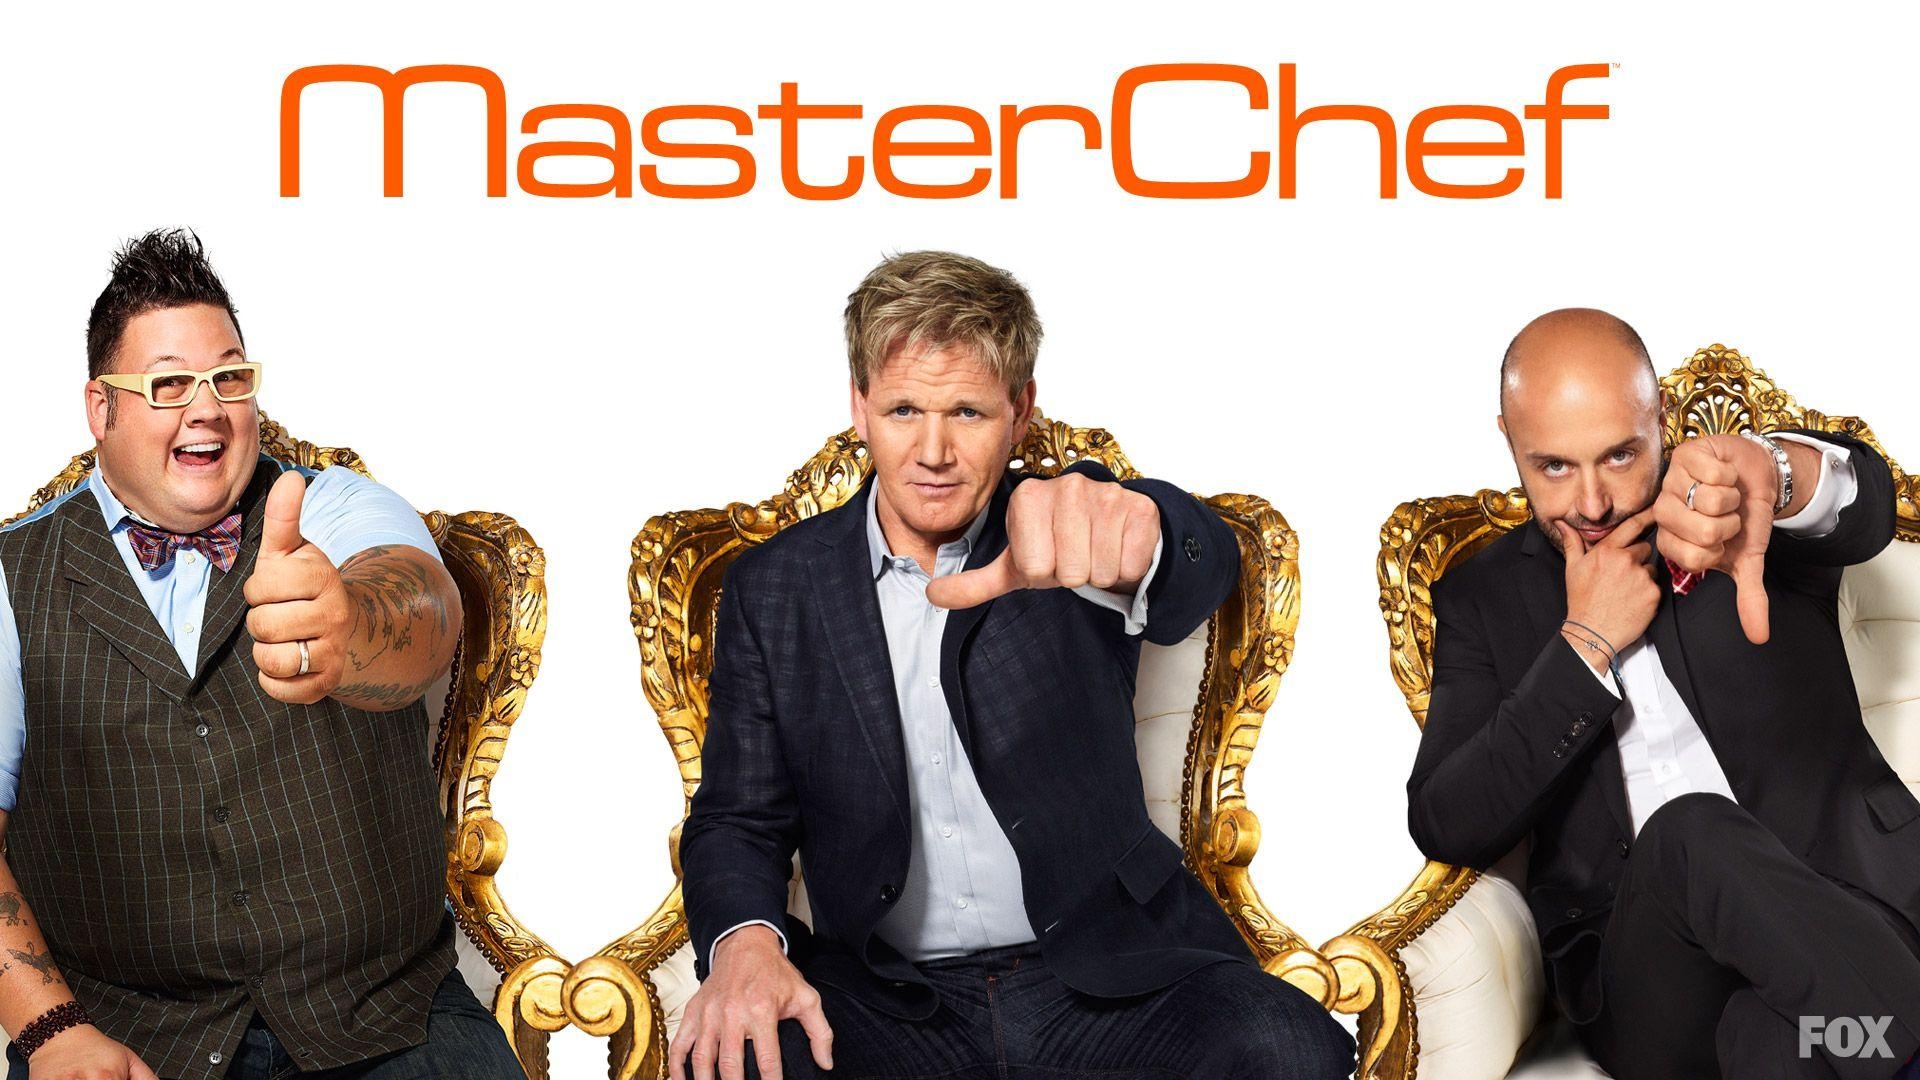 Gordon Ramsay: The co-creator and a judge of the Fox's MasterChef. 1920x1080 Full HD Background.